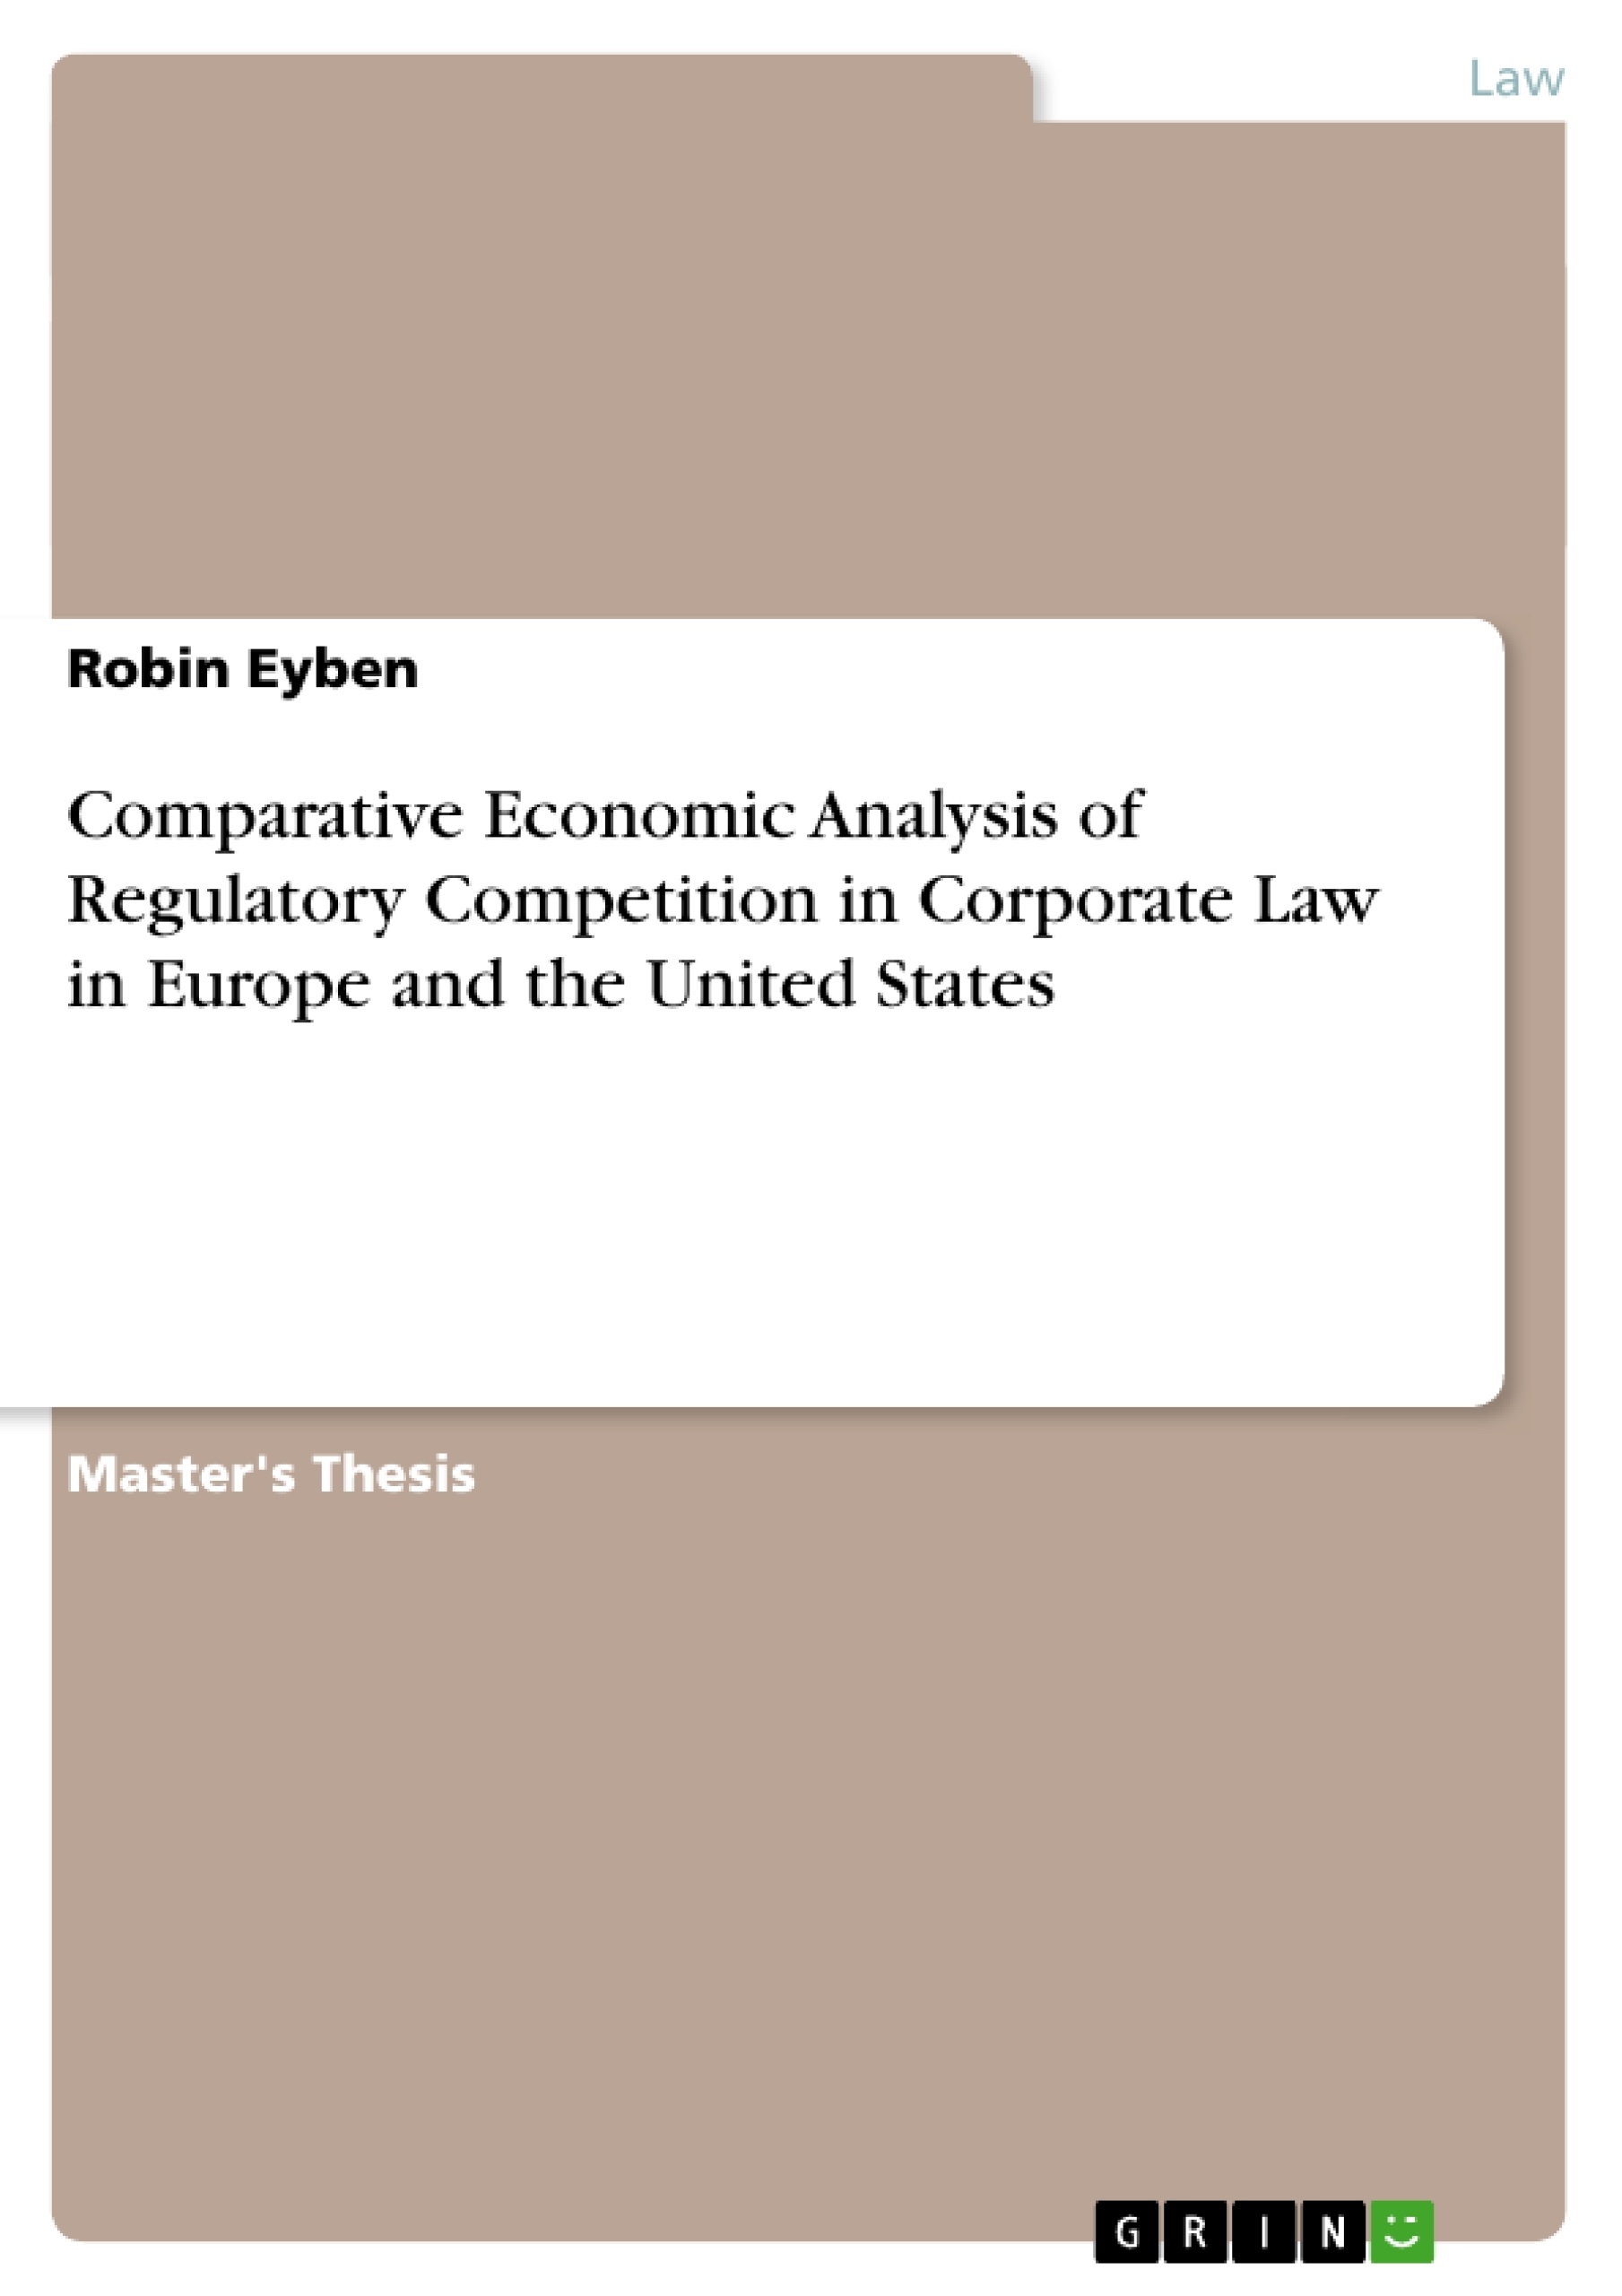 Title: Comparative Economic Analysis of Regulatory Competition in Corporate Law in Europe and the United States